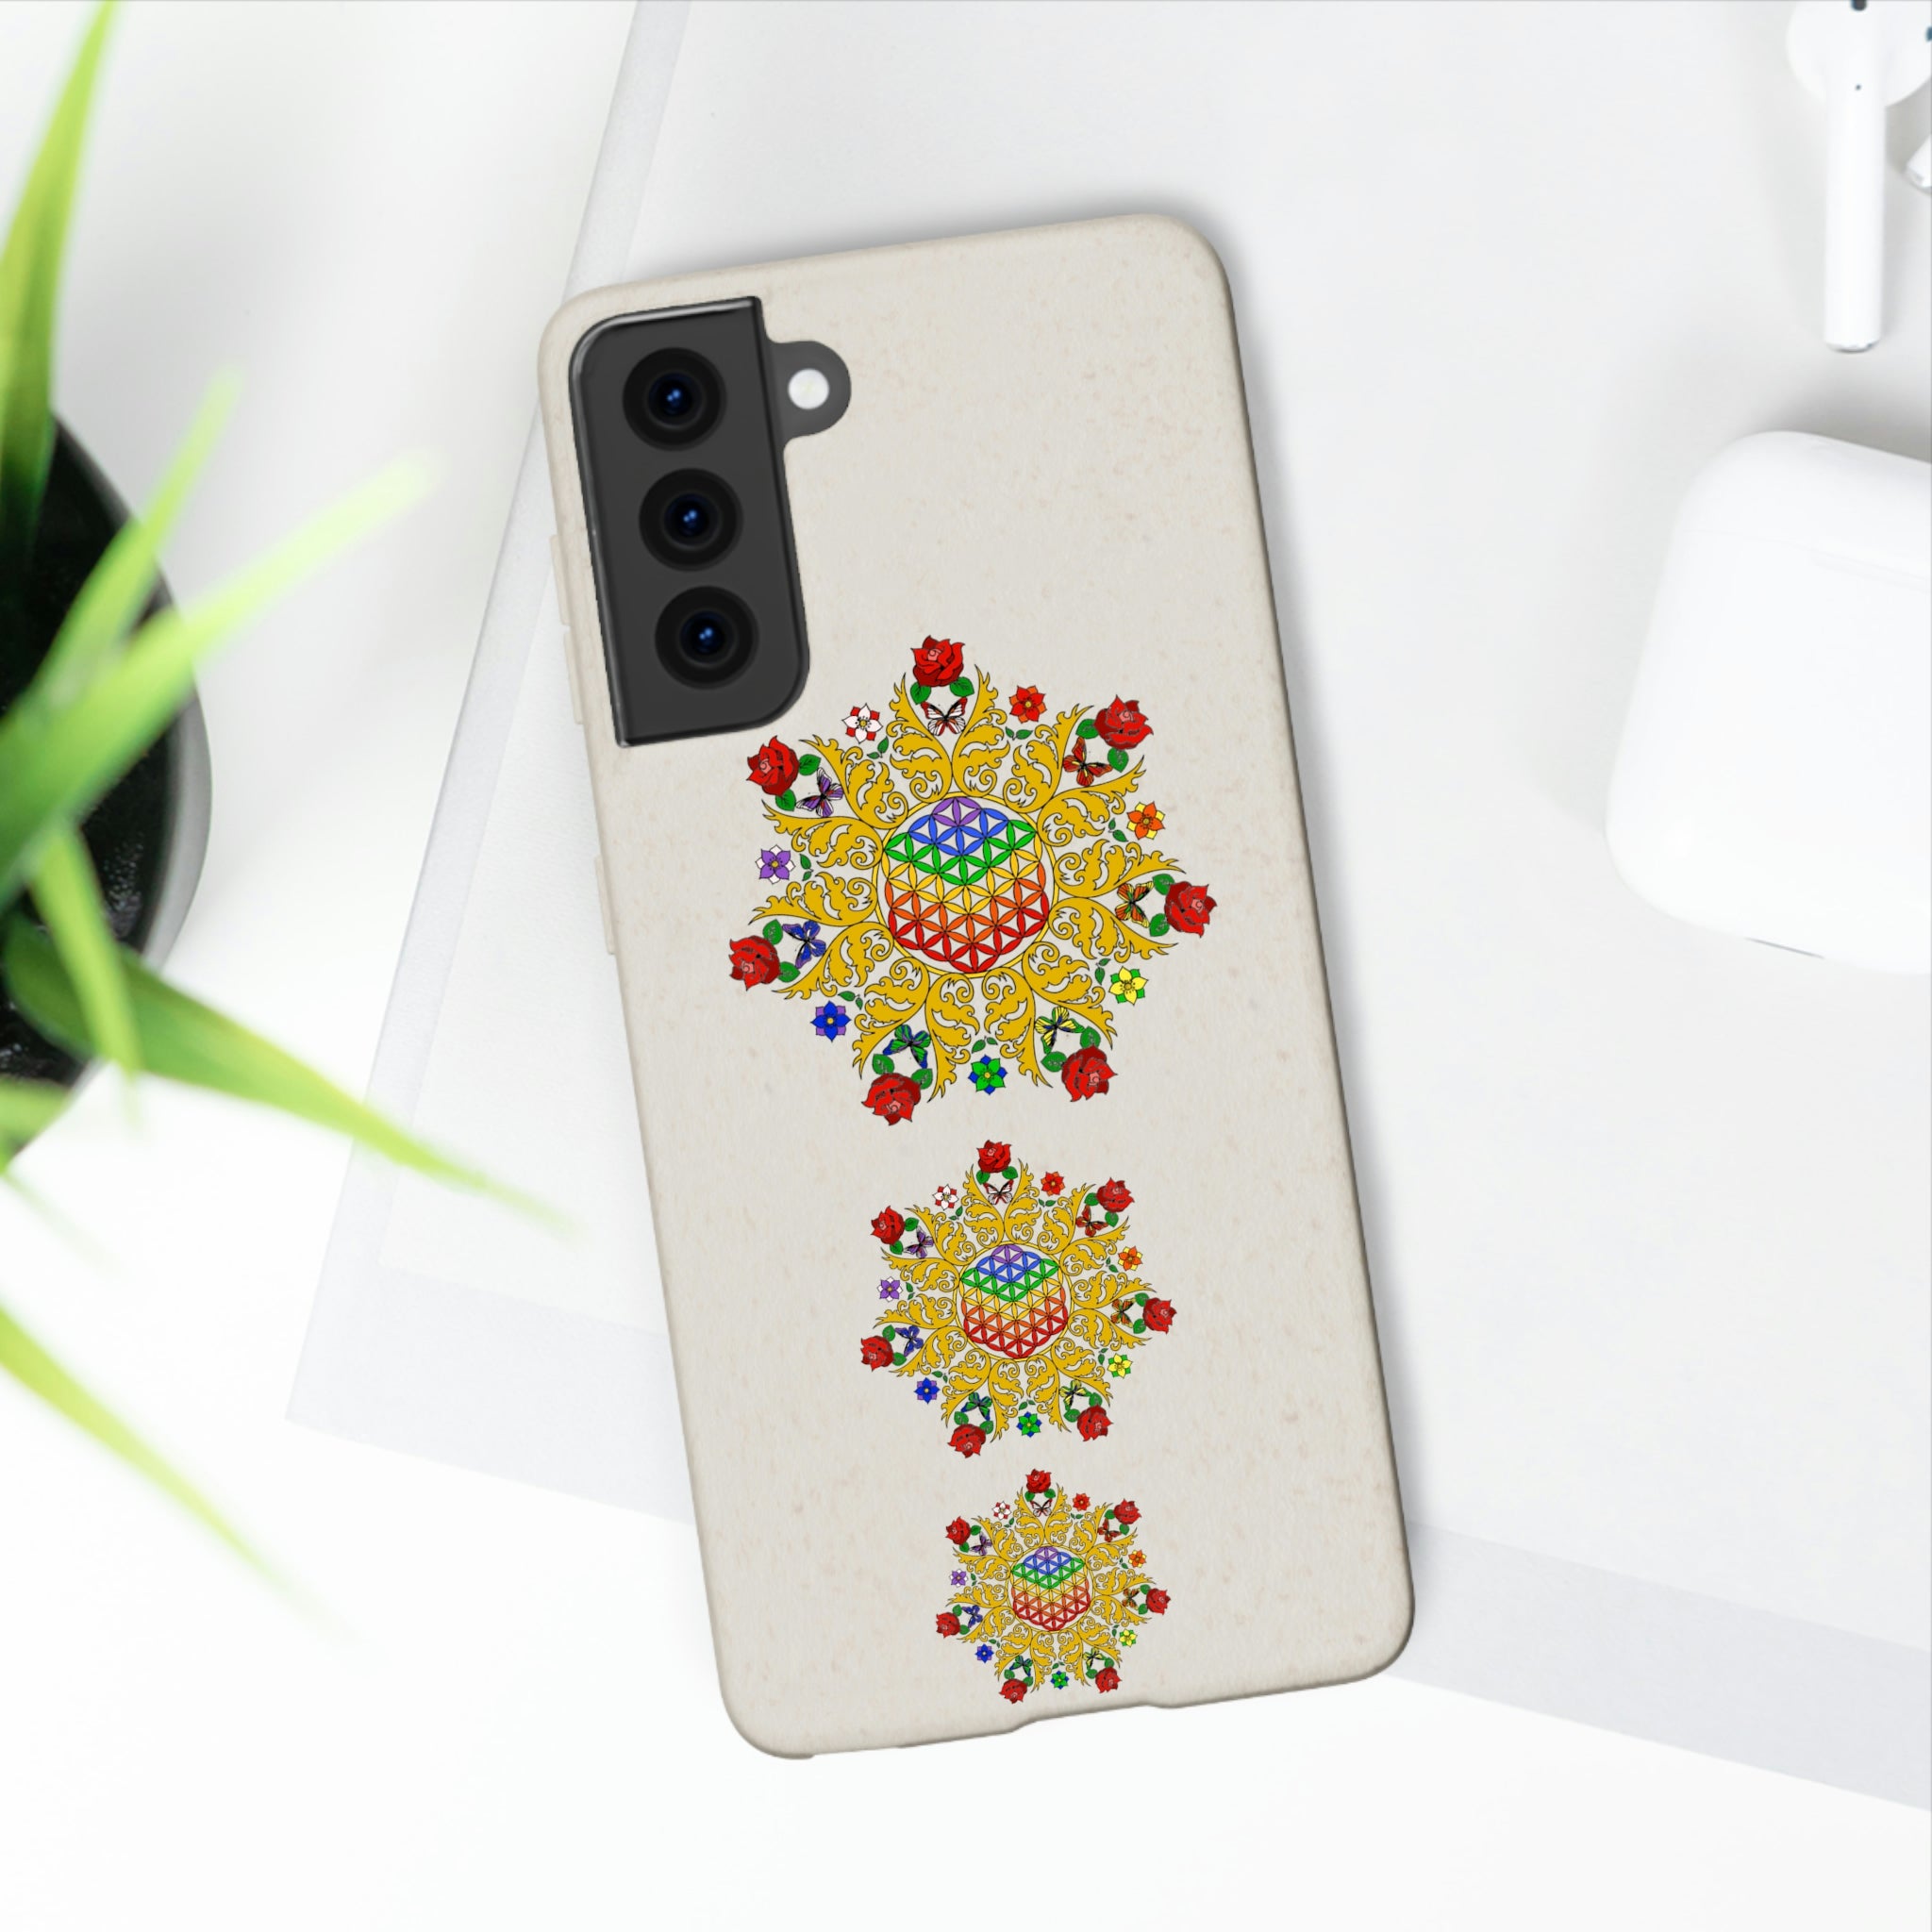 Flower of Life Biodegradable Phone Case Printify